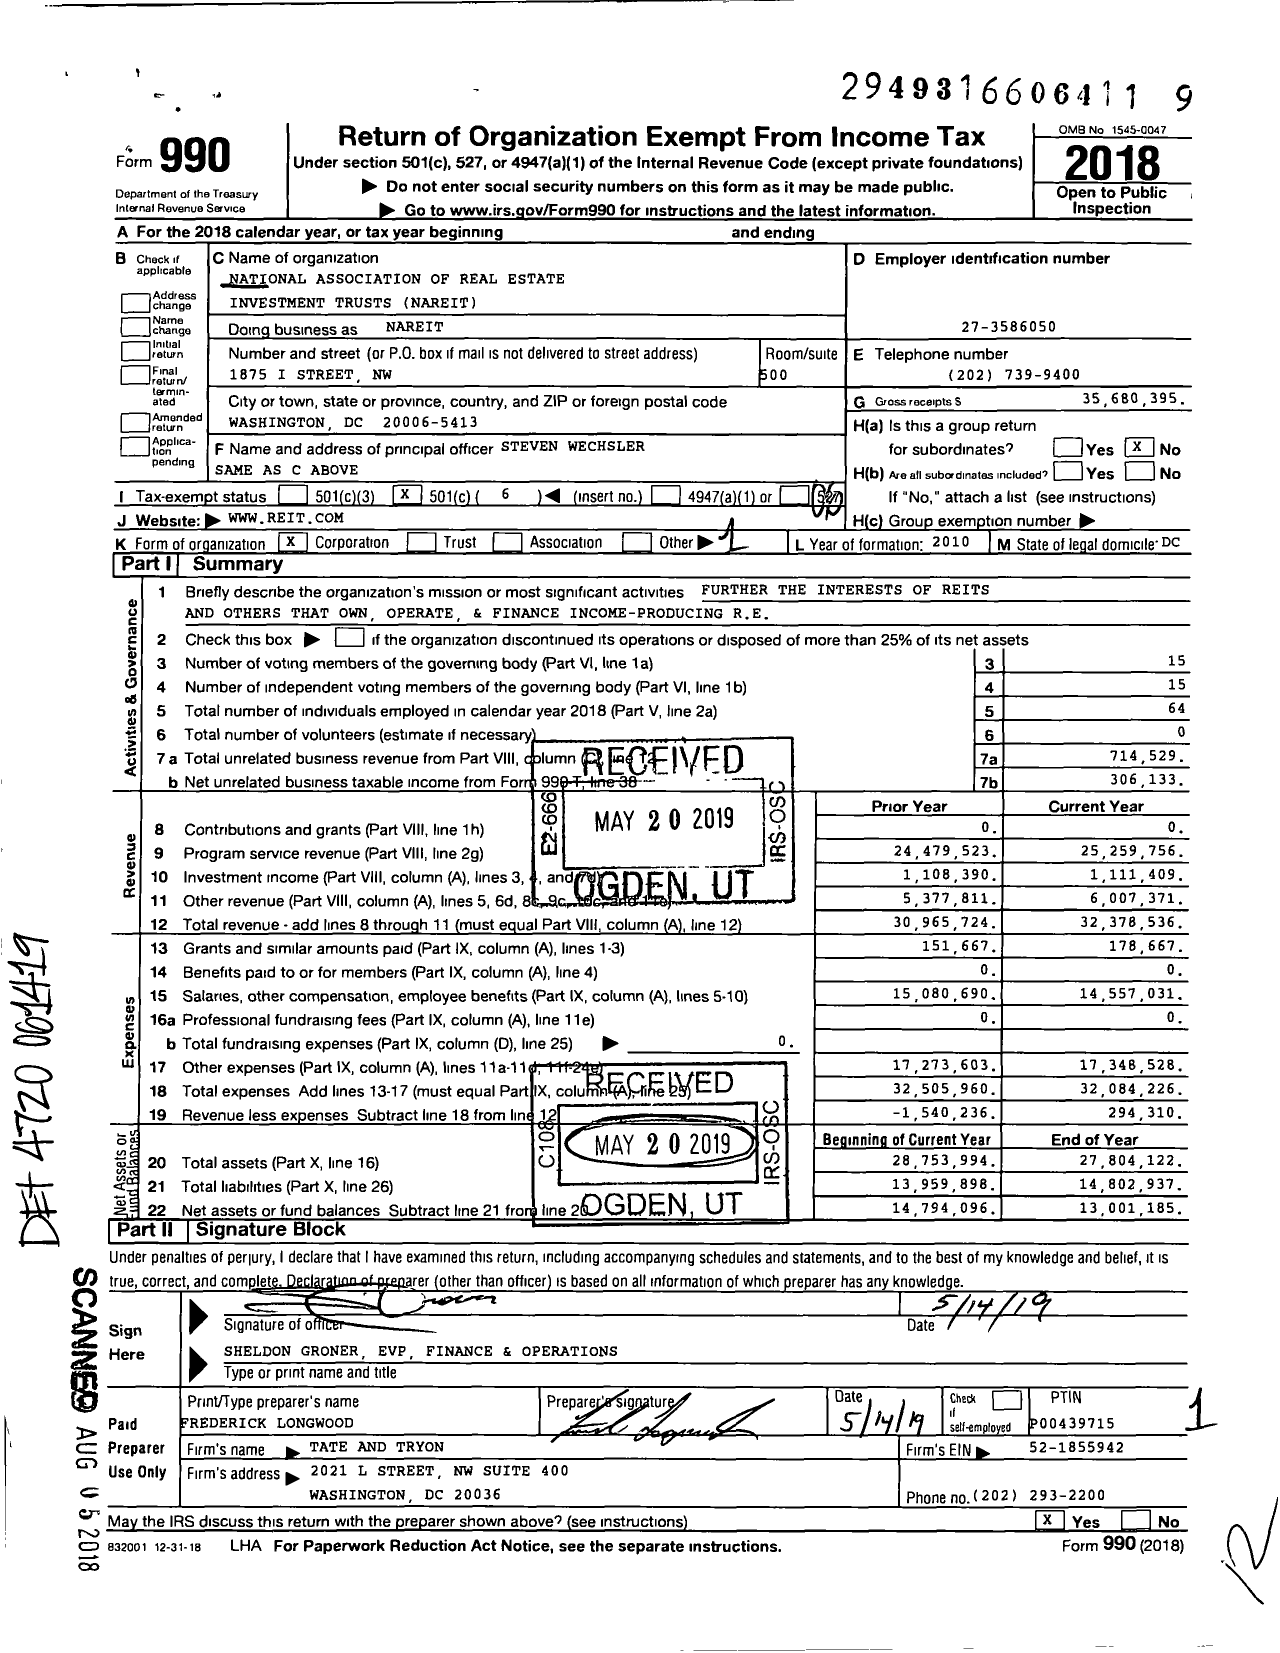 Image of first page of 2018 Form 990O for National Association of Real Estate Investment Trusts (NAREIT)